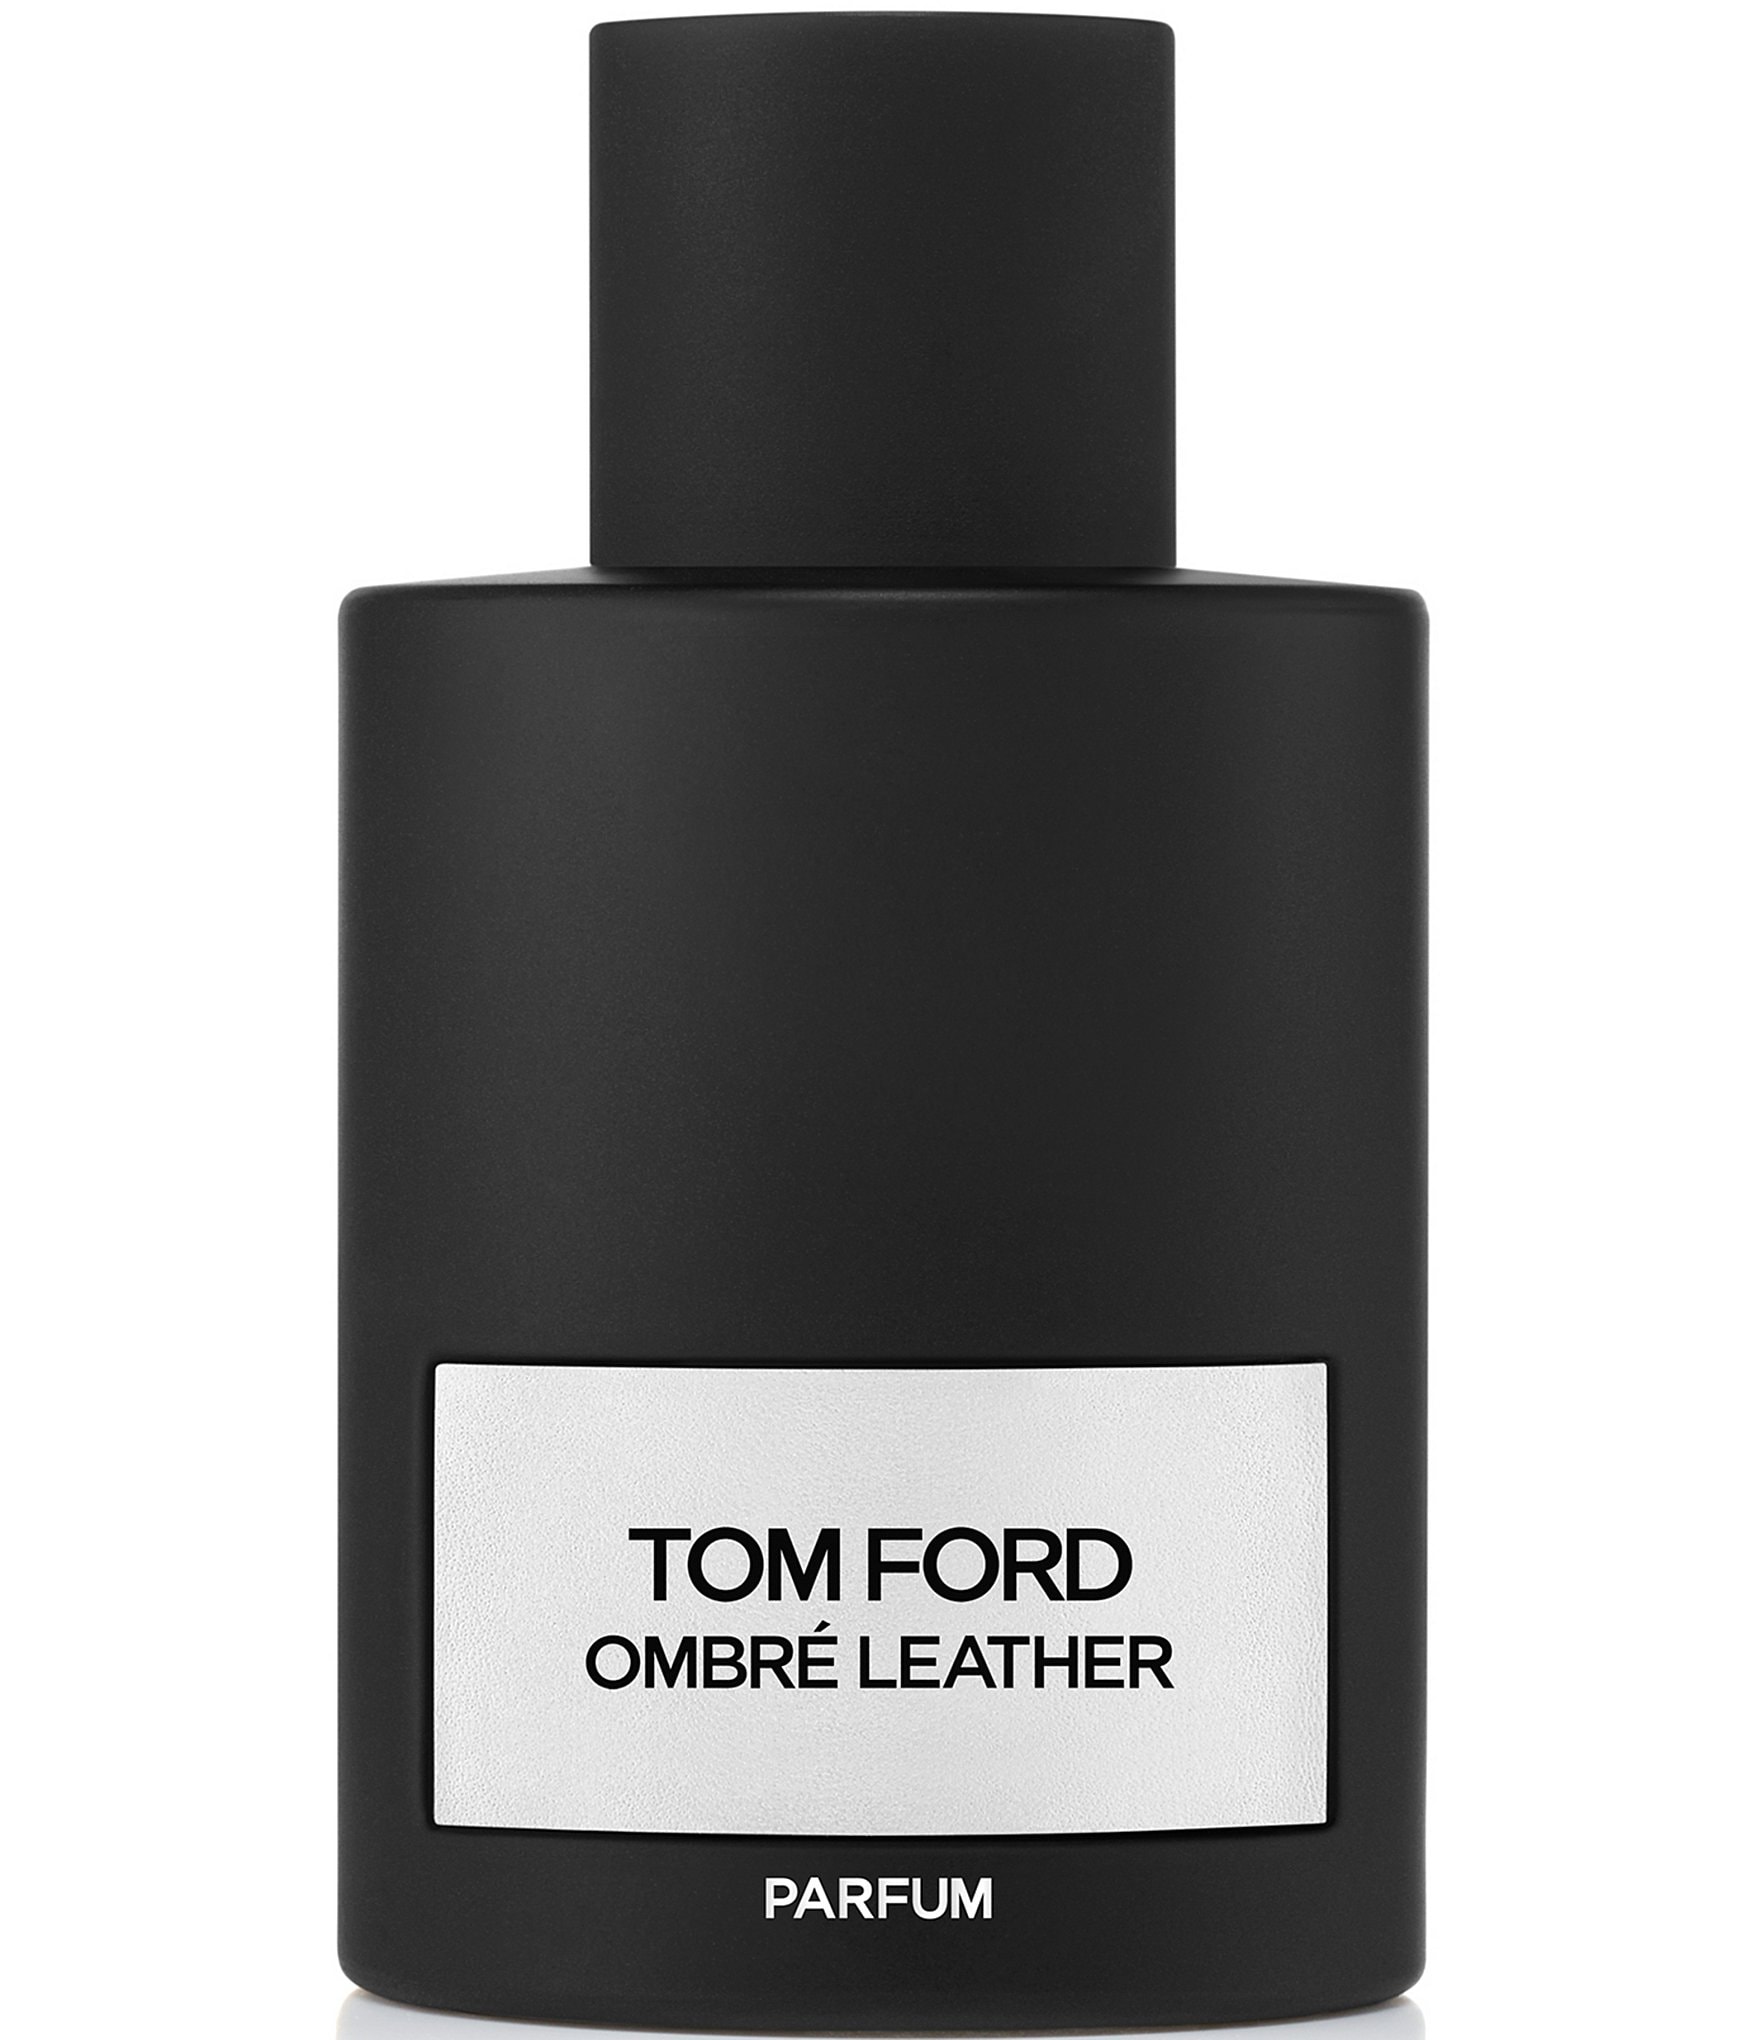 TOM FORD Ombre Leather Parfum | Dillard's